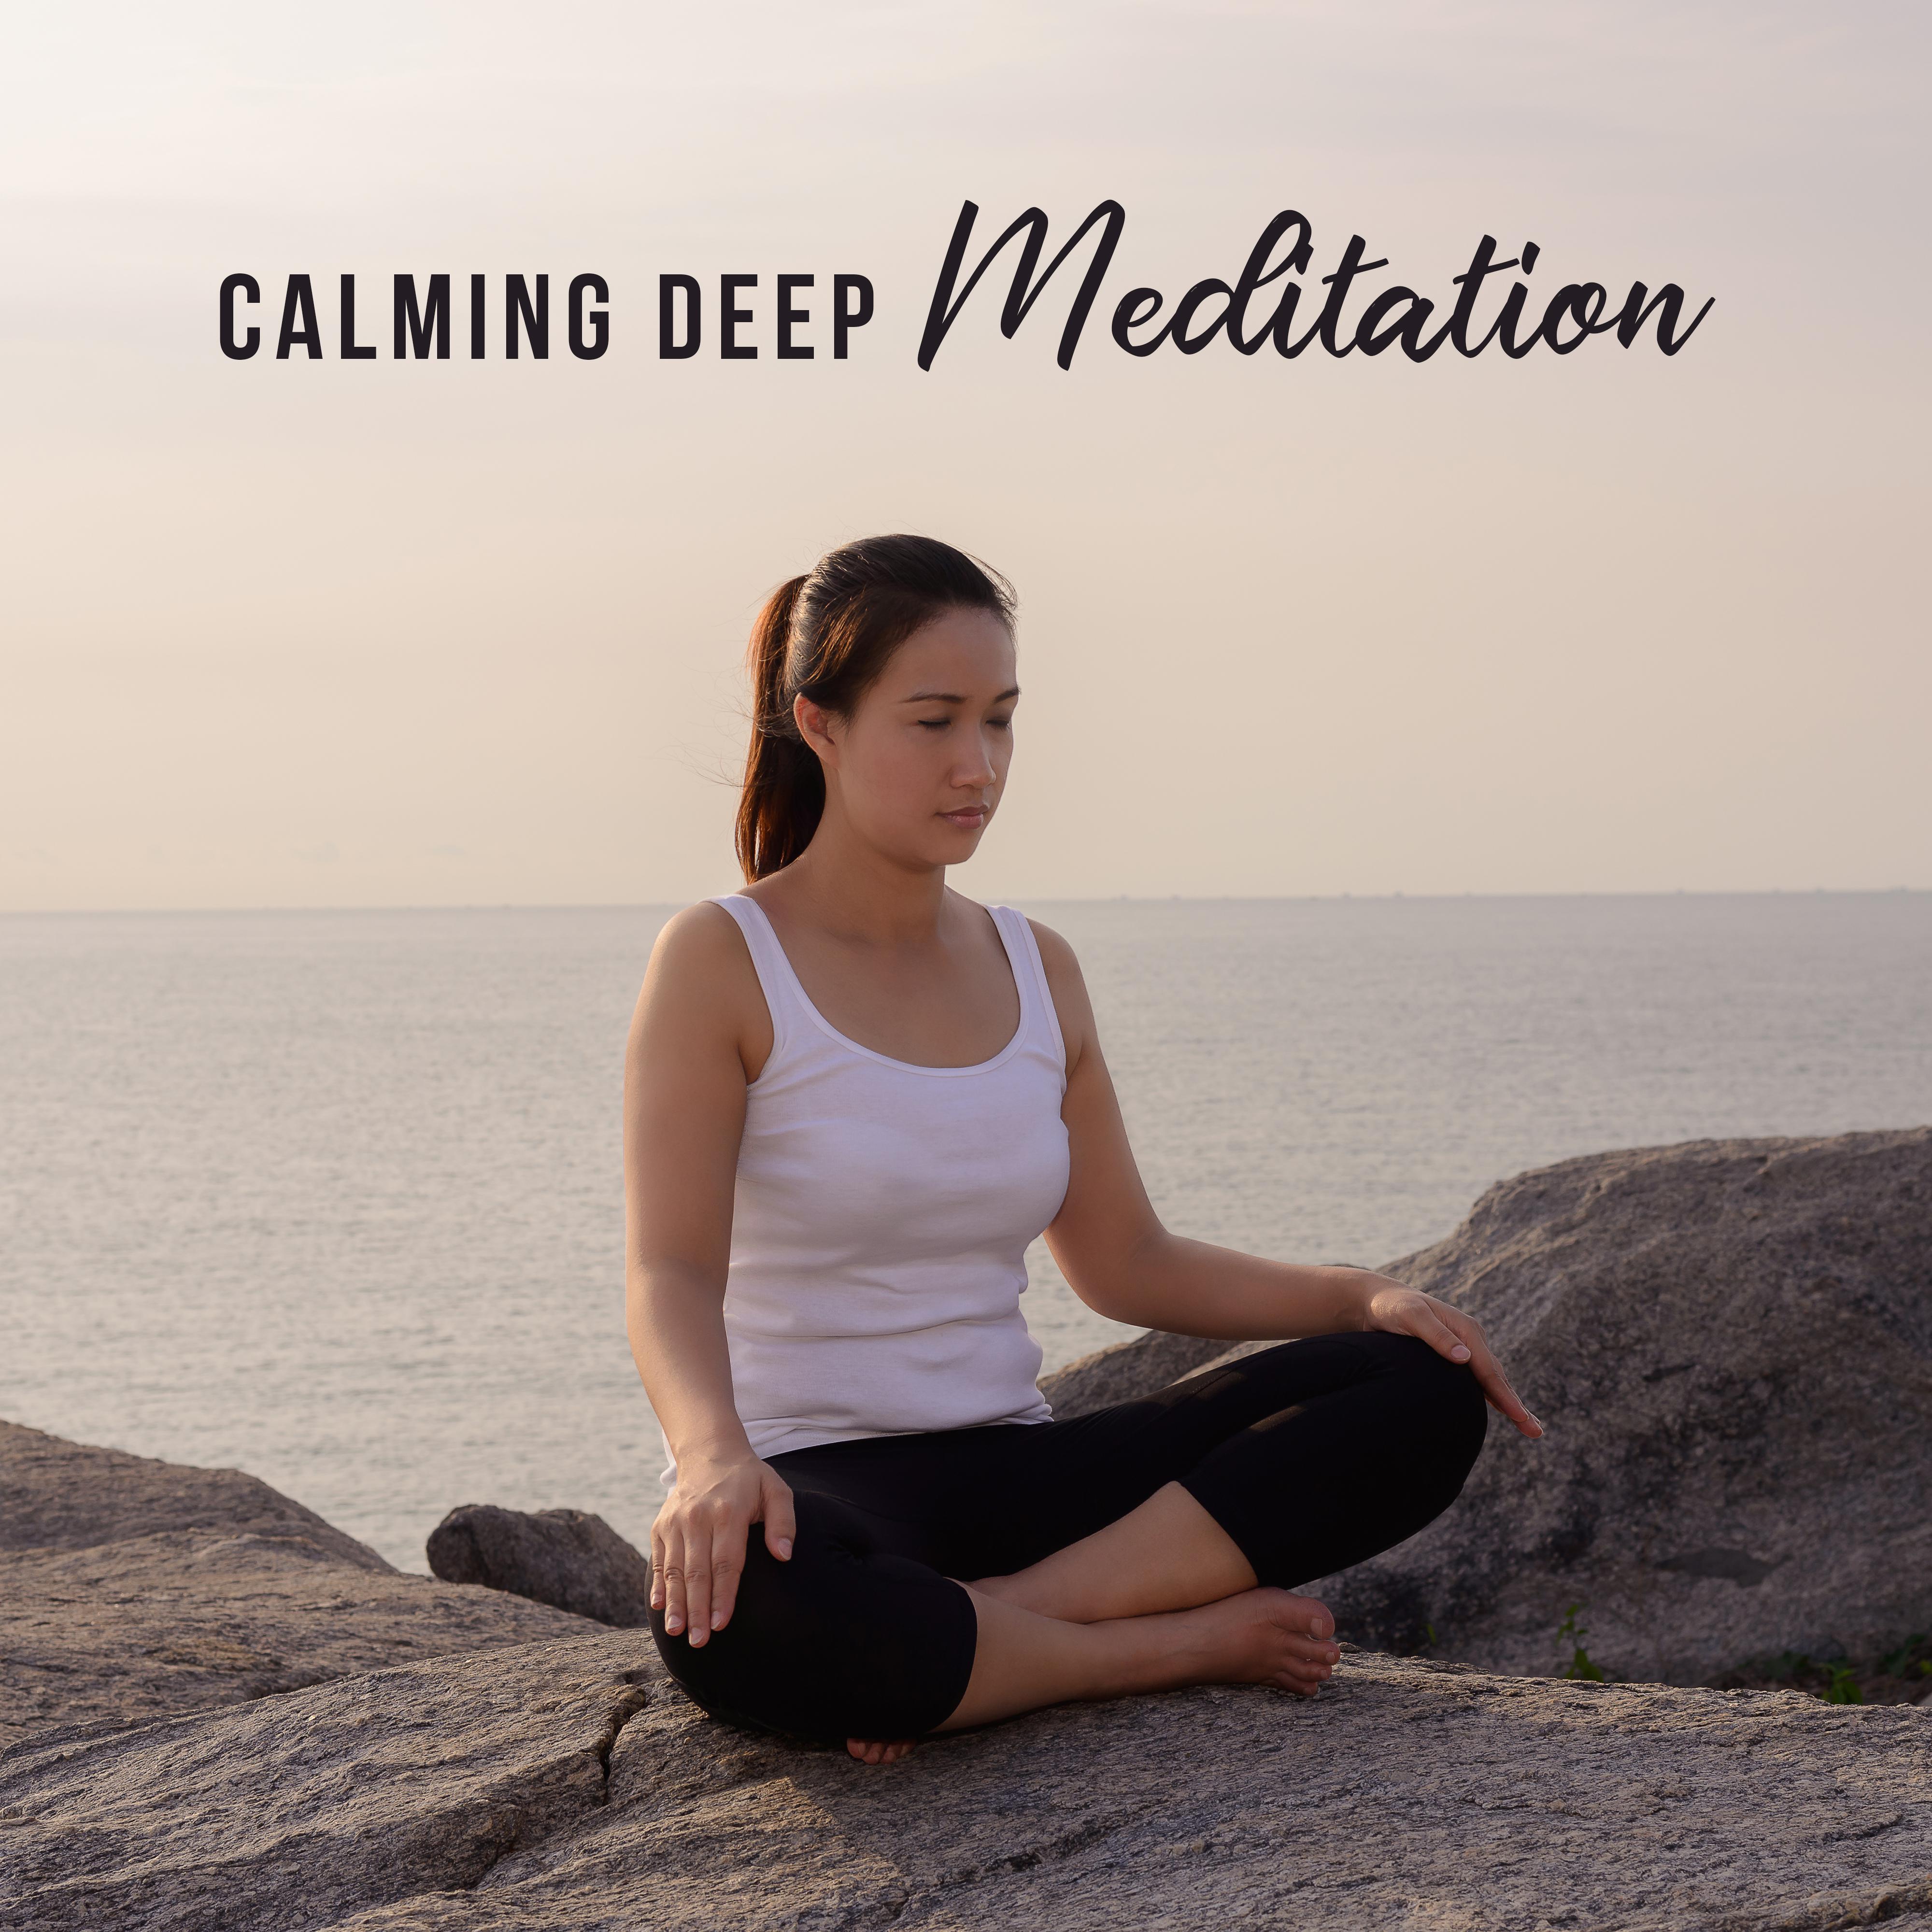 Calming Deep Meditation  Meditation Music Zone, Zen Serenity, Meditation Therapy for Pure Mind, Peaceful Melodies for Yoga, Yoga Training, Lounge